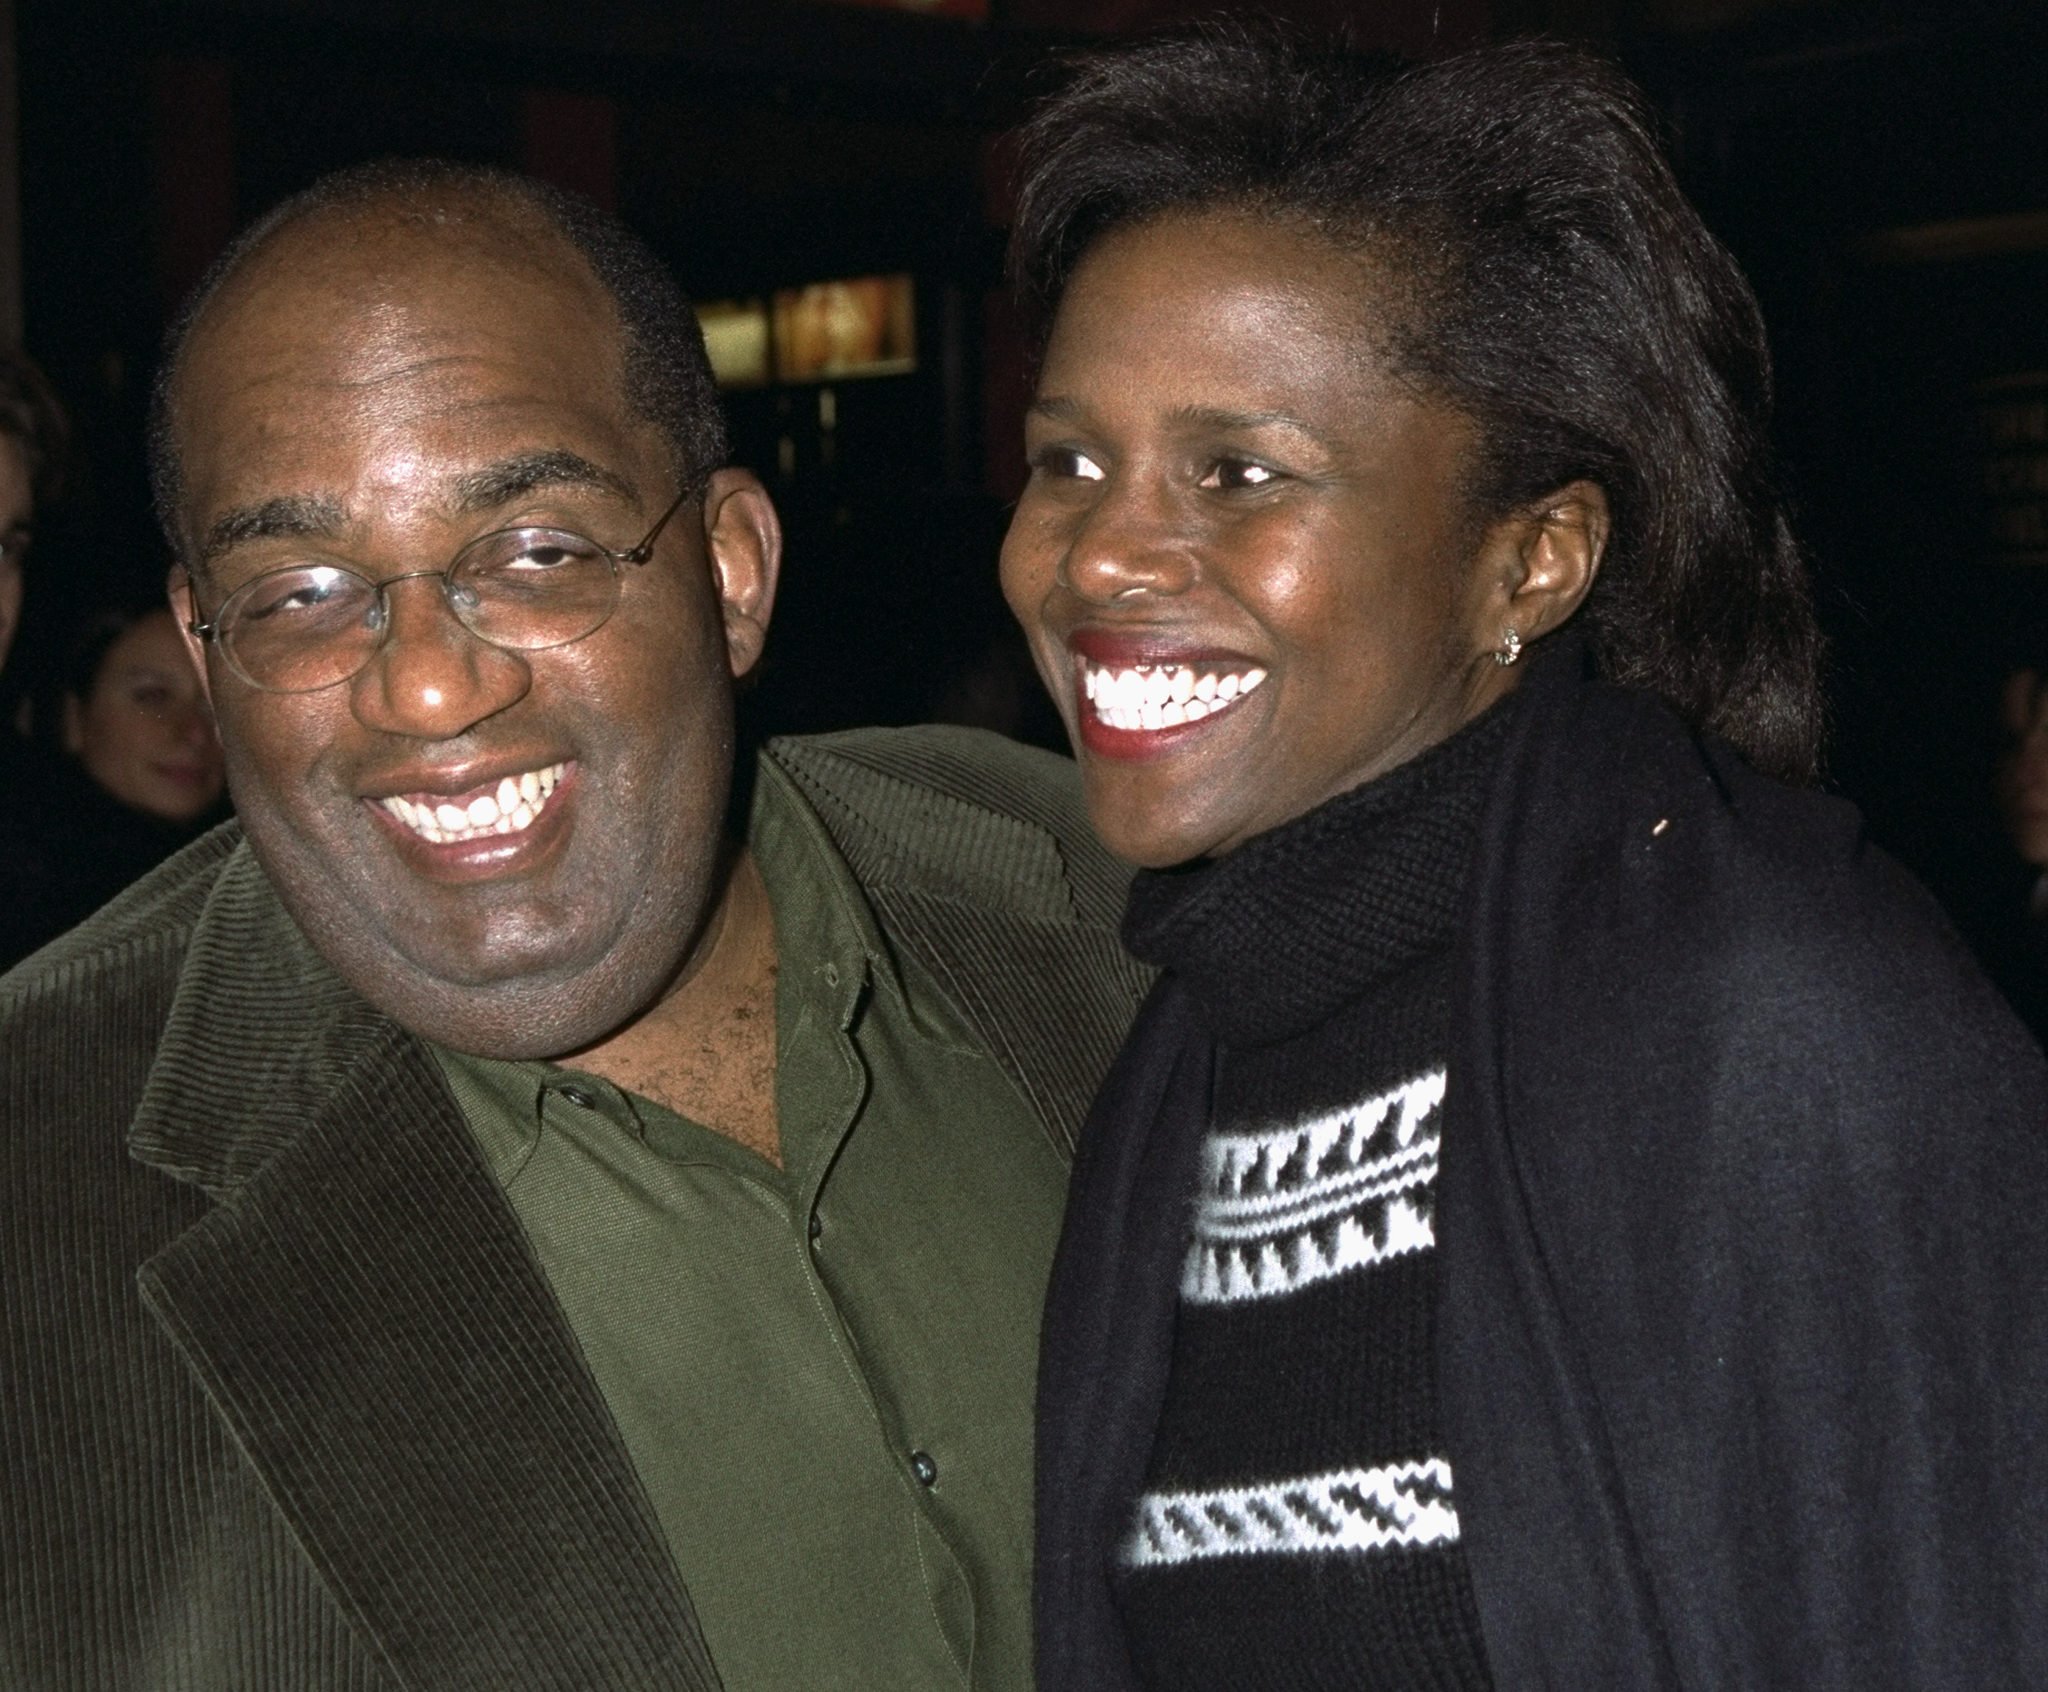 Al Roker and Deborah Roberts at the premiere of the movie "The Cider House Rules" on November 15, 1999. | Source: Richard Corkery/NY Daily News Archive/Getty Images